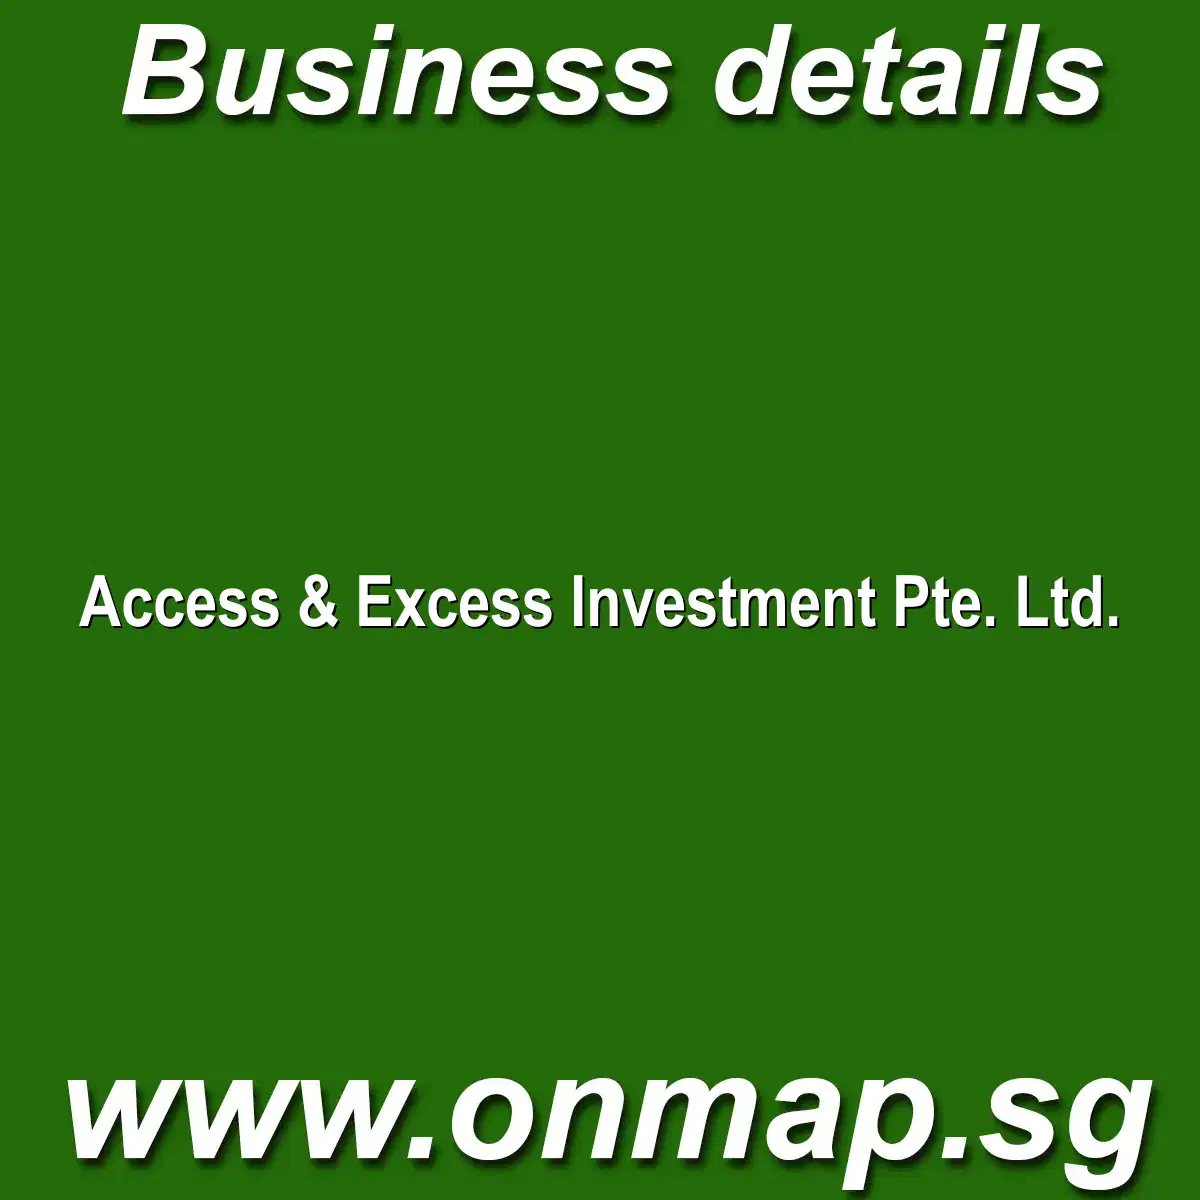 Access & Excess Investment Pte. Ltd.